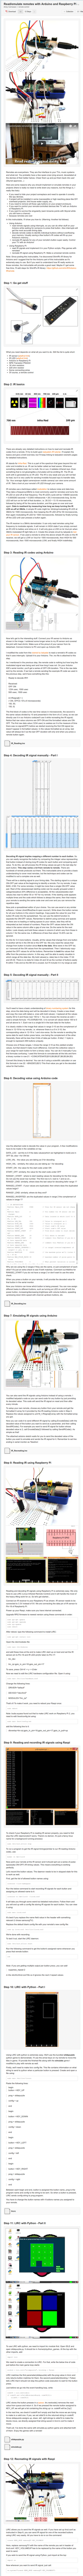 ./20161222-0118-cet-tutorial-about-reading-and-simulating-ir-with-arduino-or-raspberry-pi-1.png